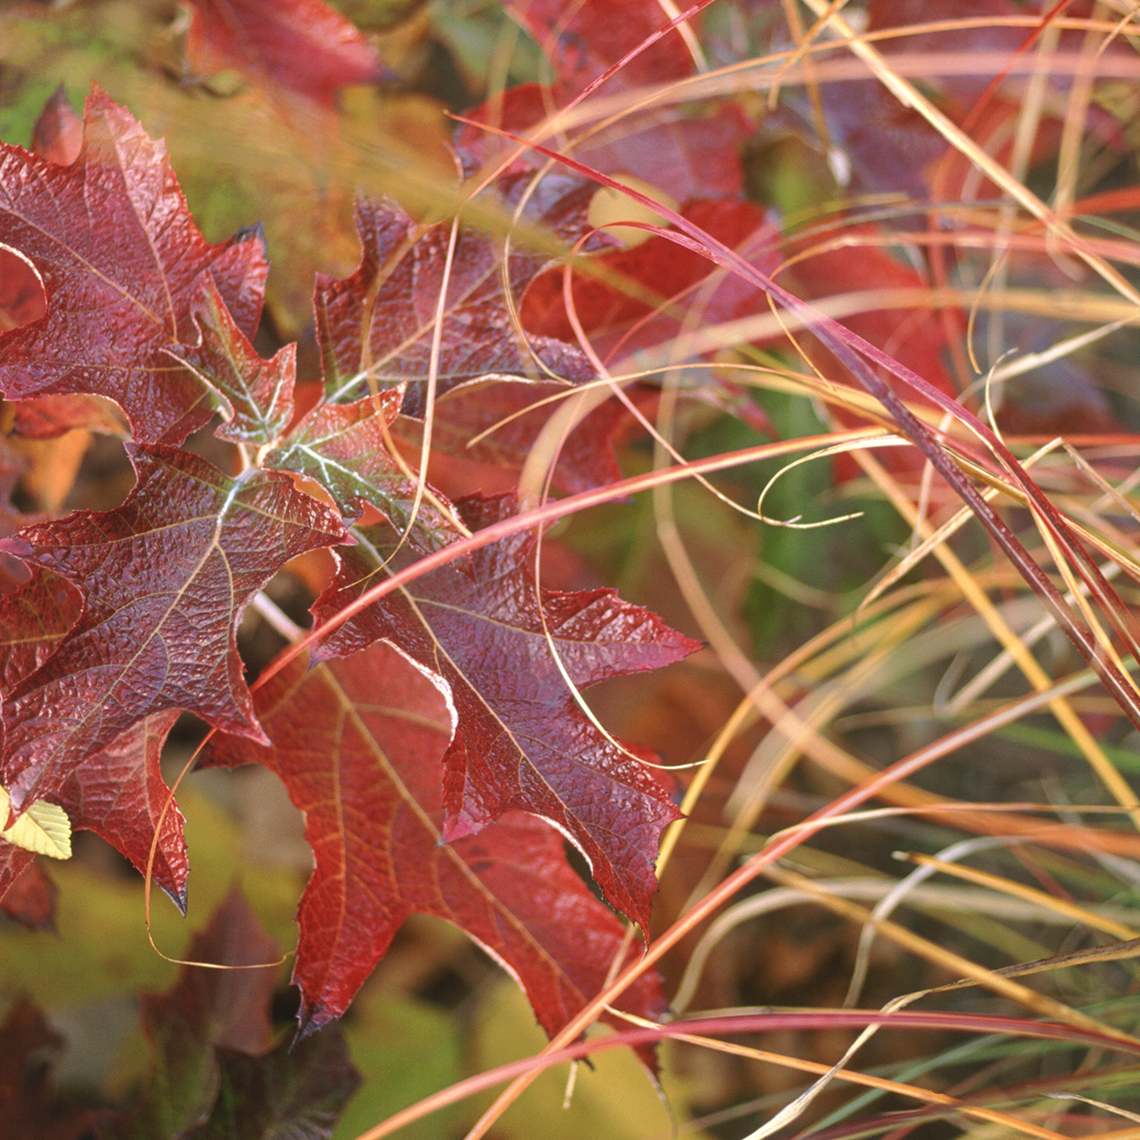 The fall color of oakleaf hydrangea has turned a deep burgundy red